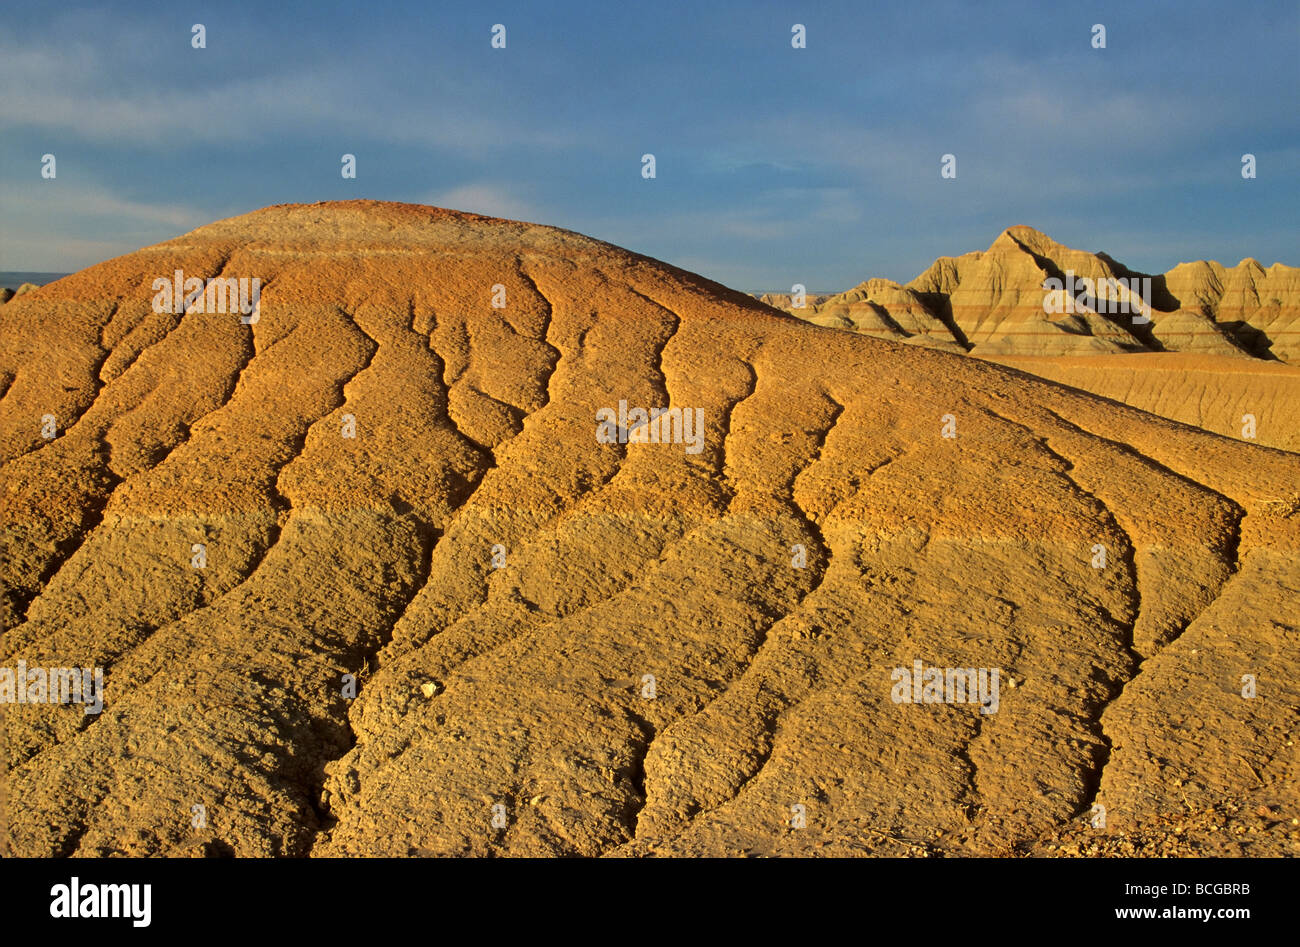 Soft sediments of the Badlands eroded by running water at Badlands National Park South Dakota BEAN ALPix 0077 Stock Photo